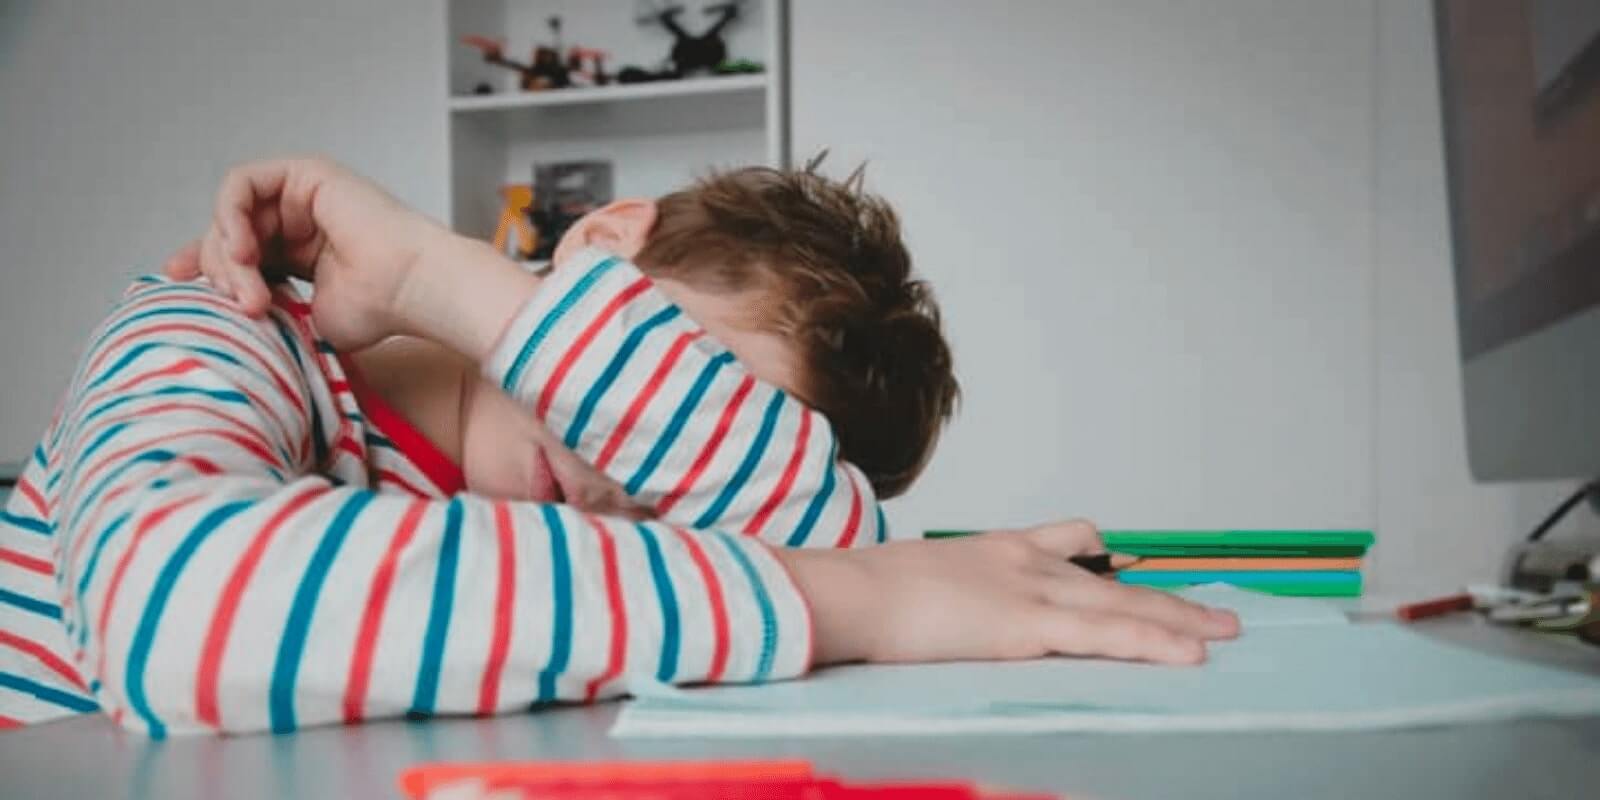 A teen boy putting his head down on a table with his arm crossed